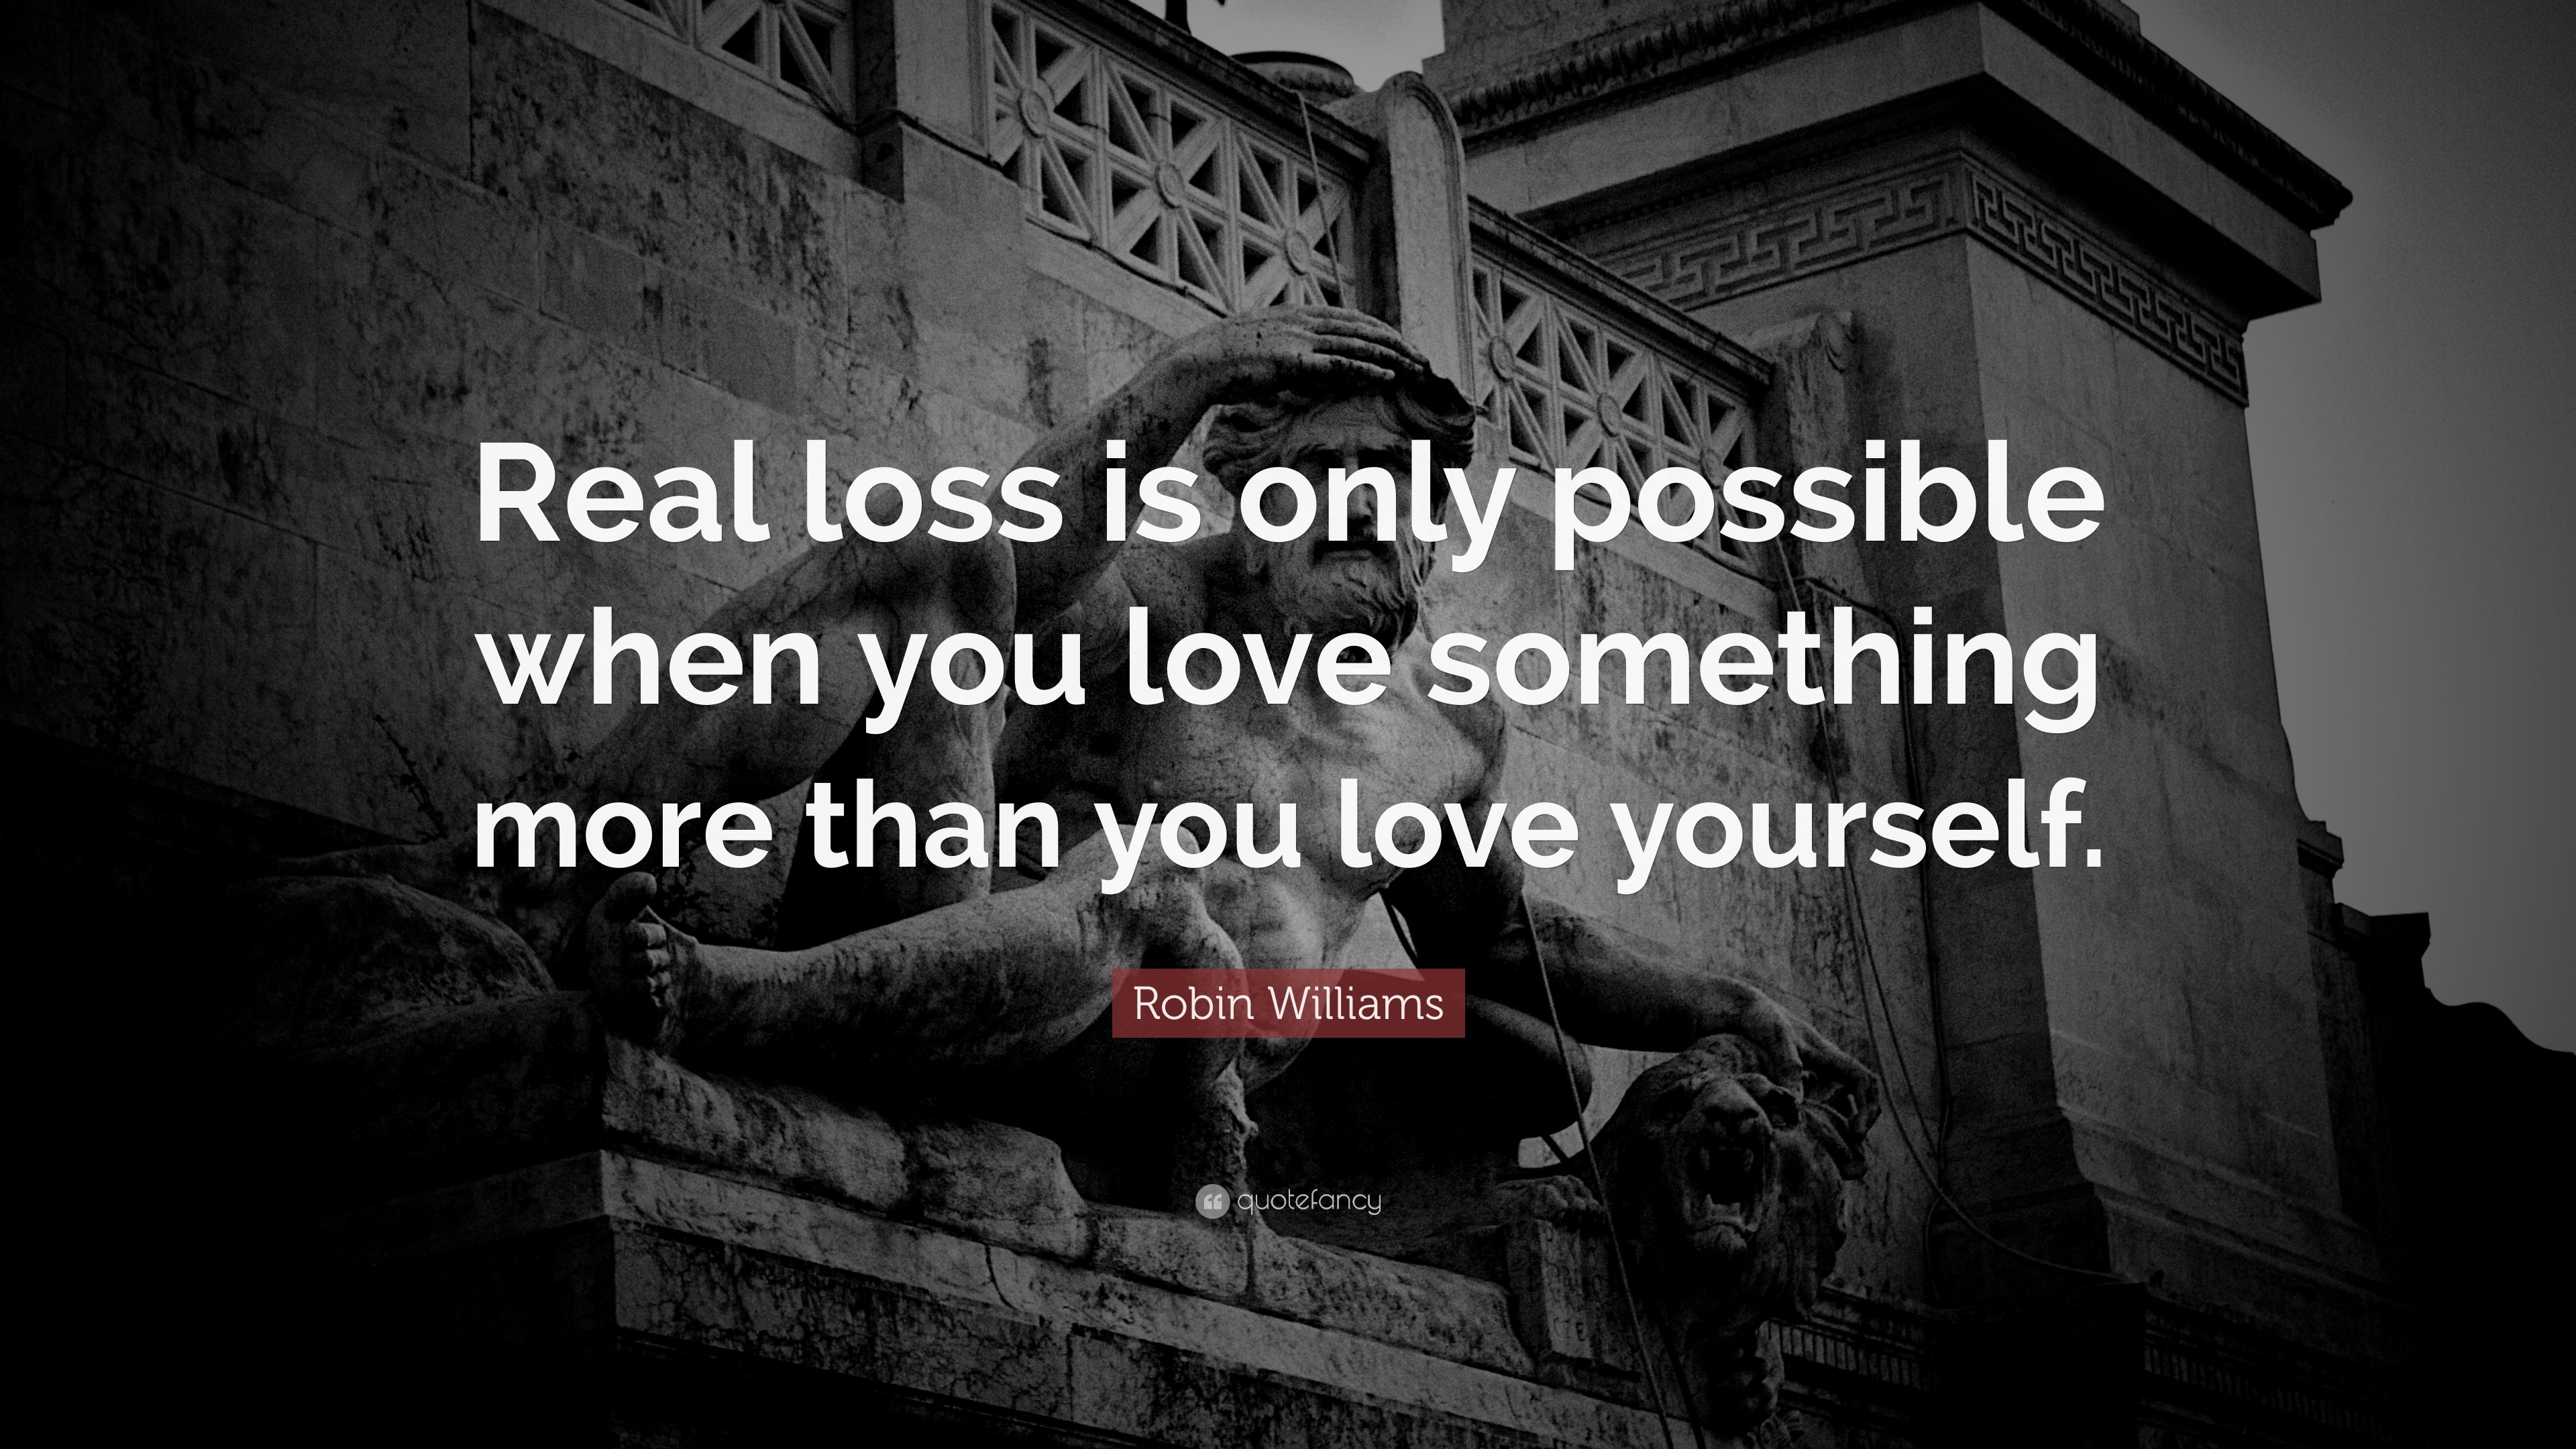 3840x2160 Robin Williams Quote: “Real loss is only possible when you love something  more than